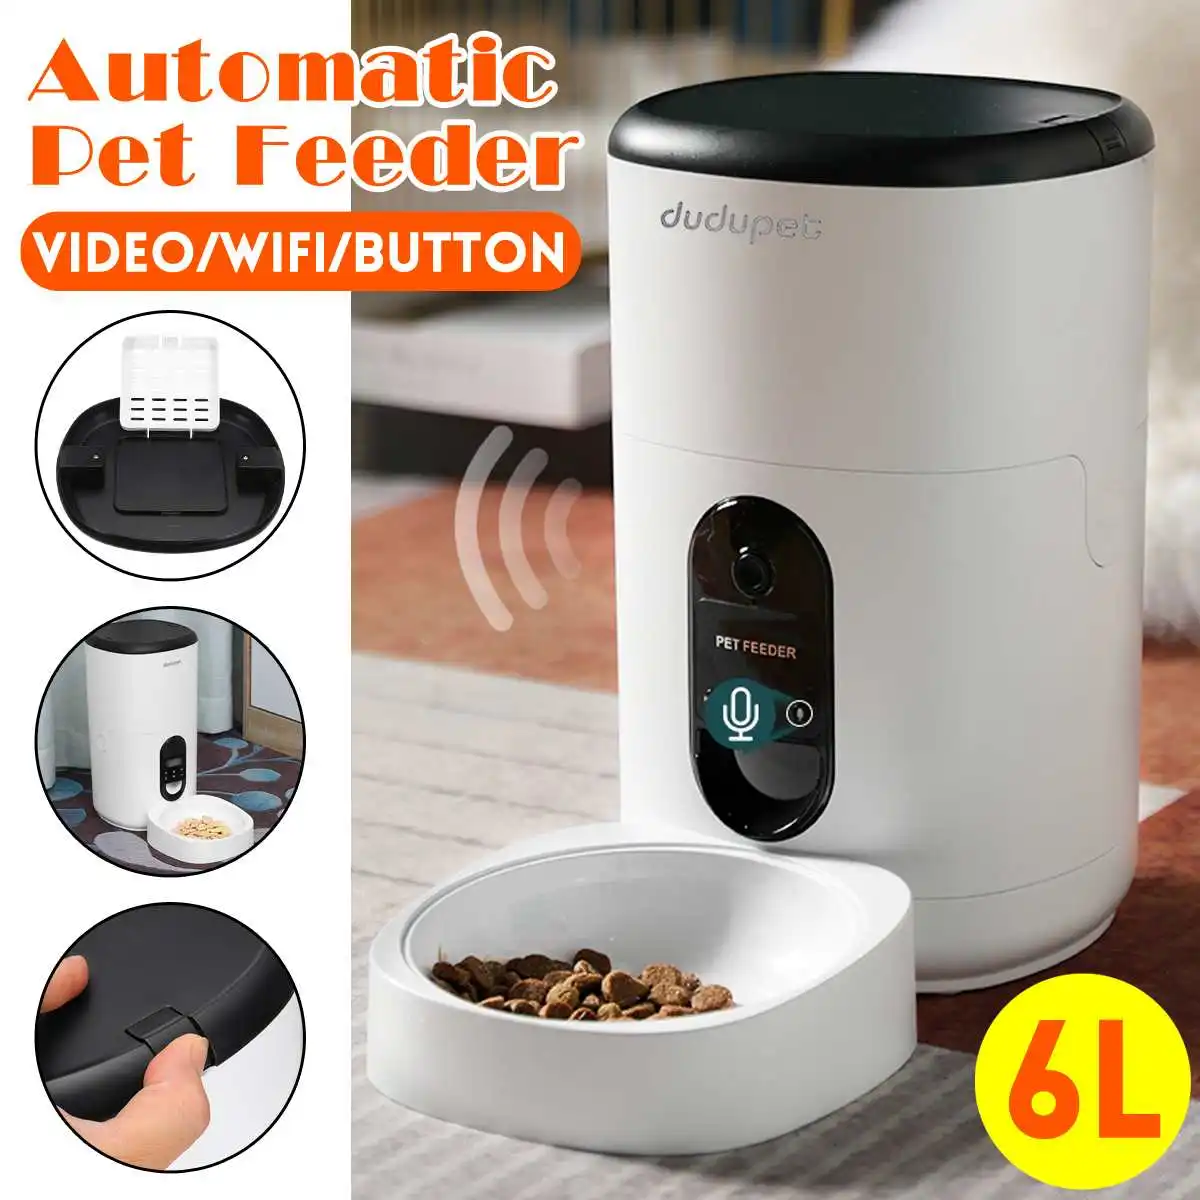 

[Video/WiFi/Button Version]6L Automatic Pet Feeder Smart 10S Voice Recorder APP Control Timer Feeding Cat Dog Food Dispenser New